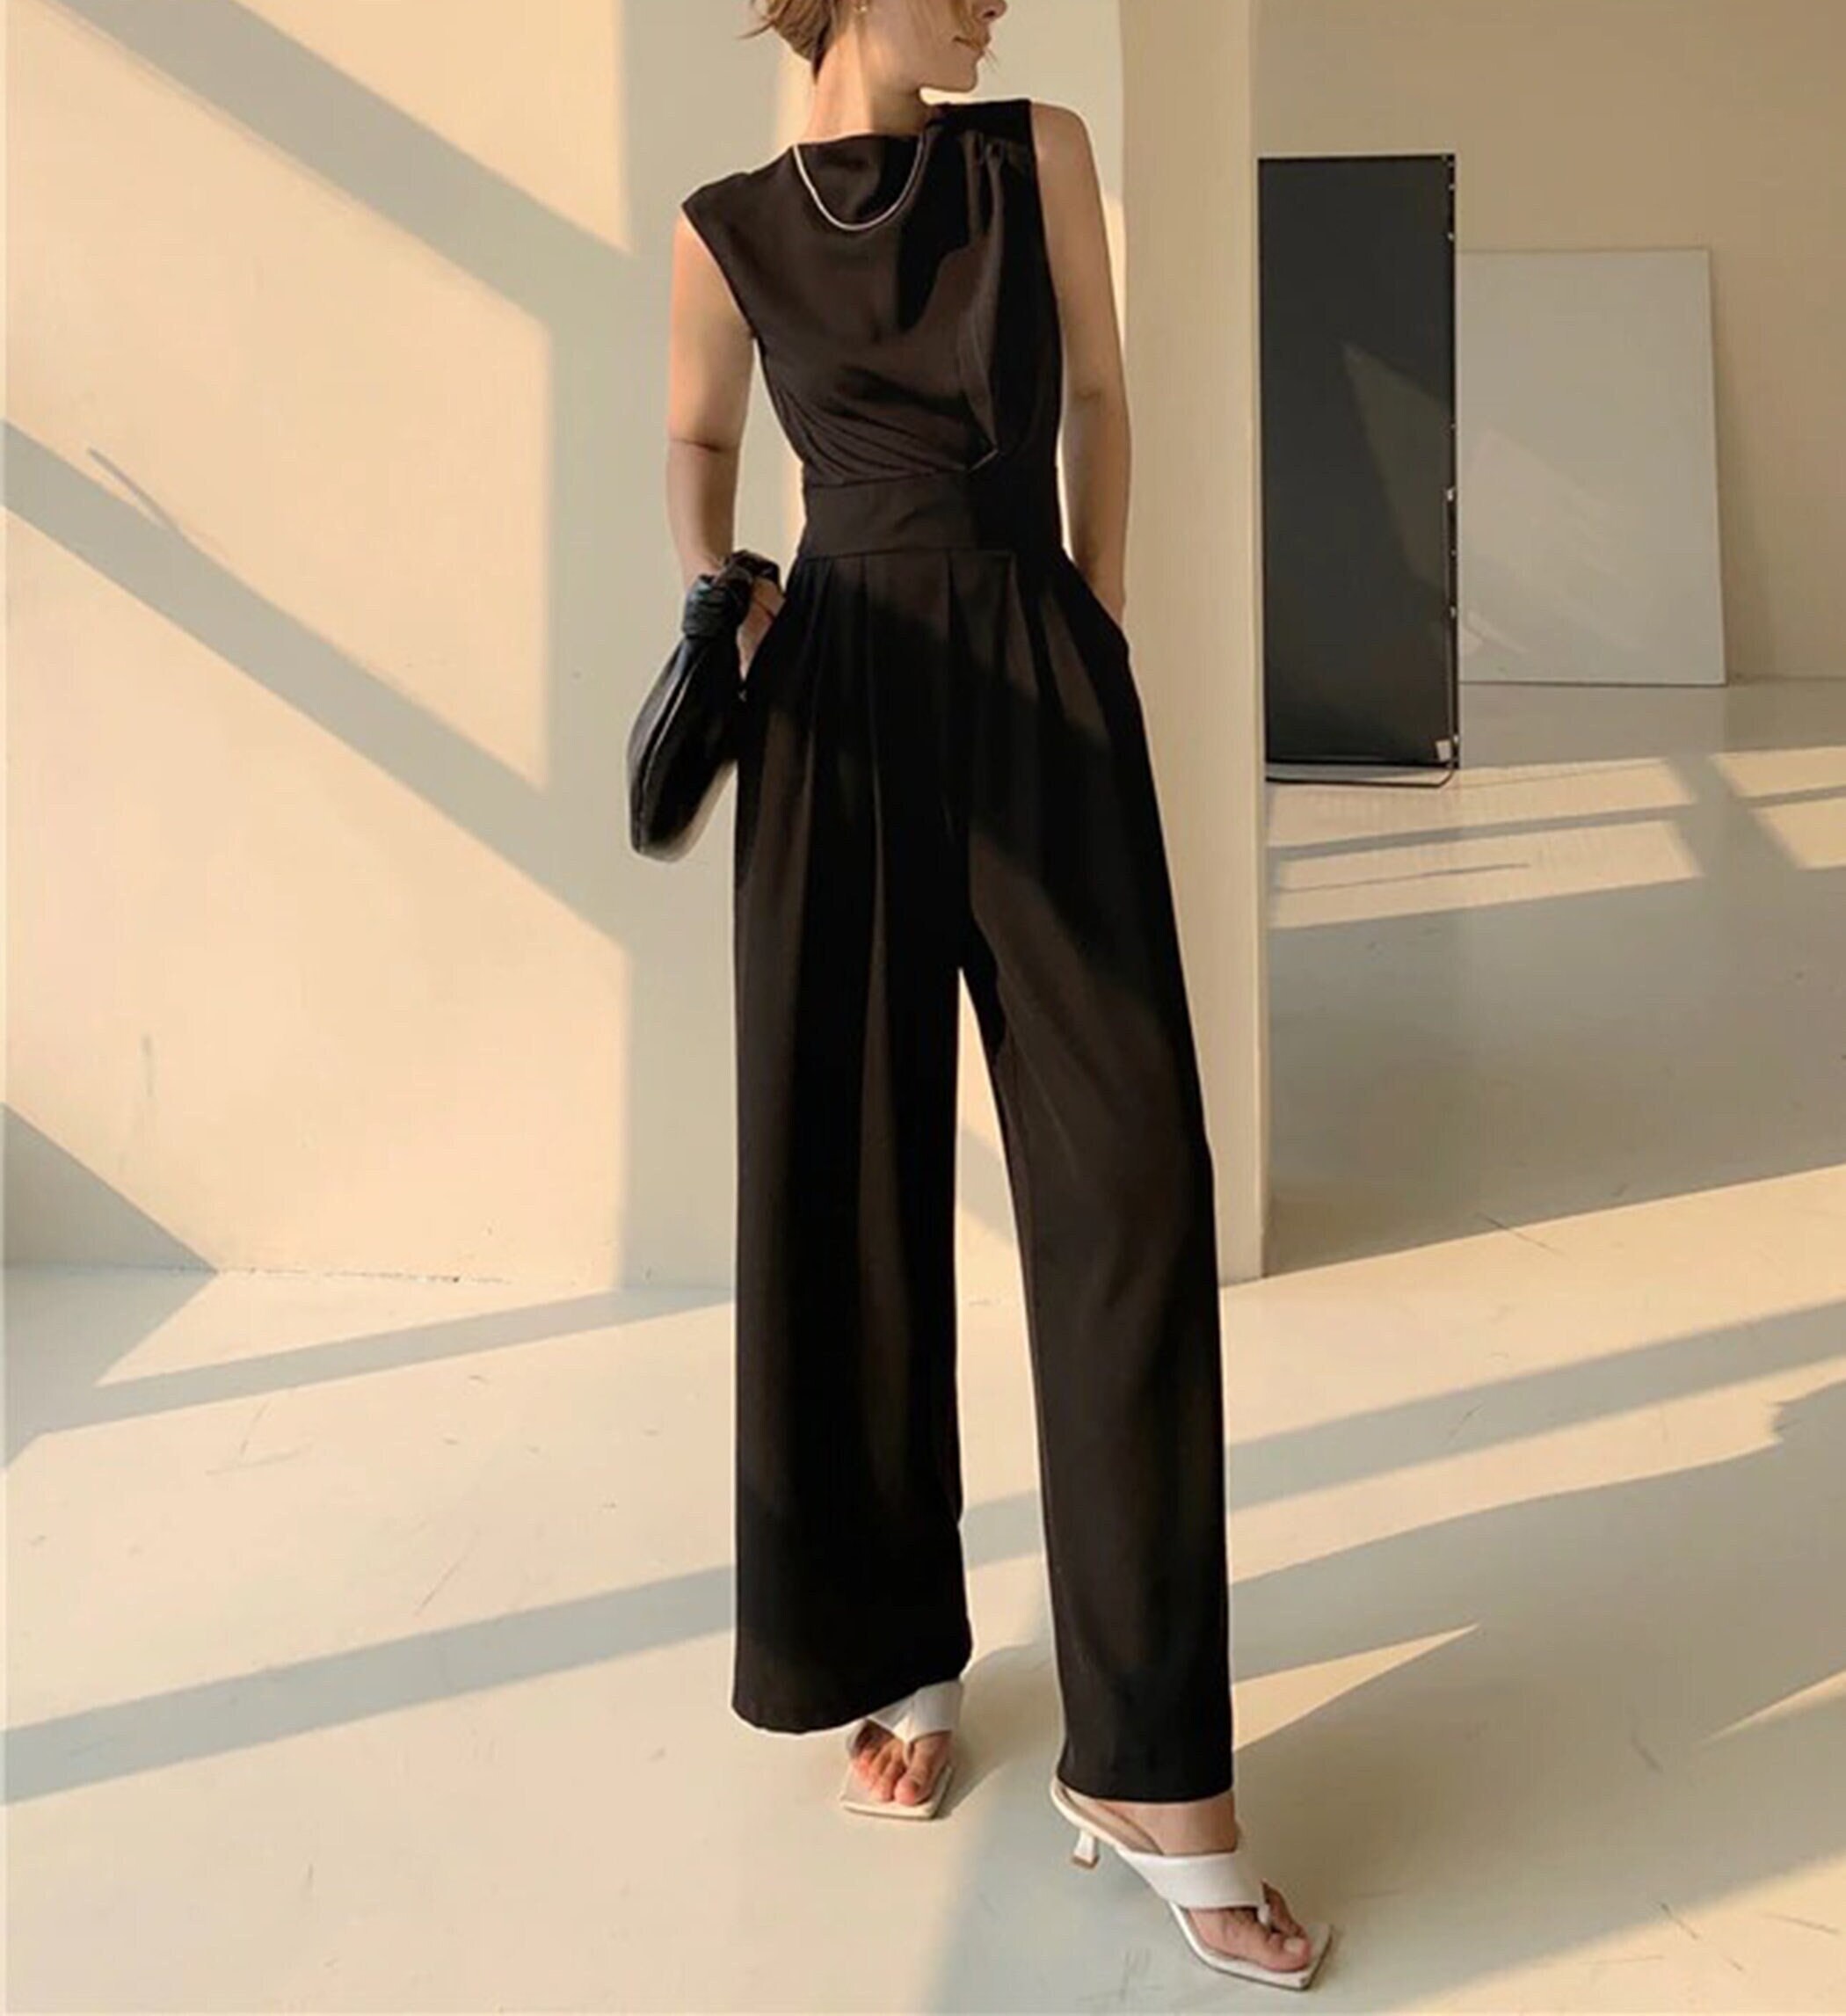 1 Jumpsuit, 3 Fashionable Ways - MY CHIC OBSESSION